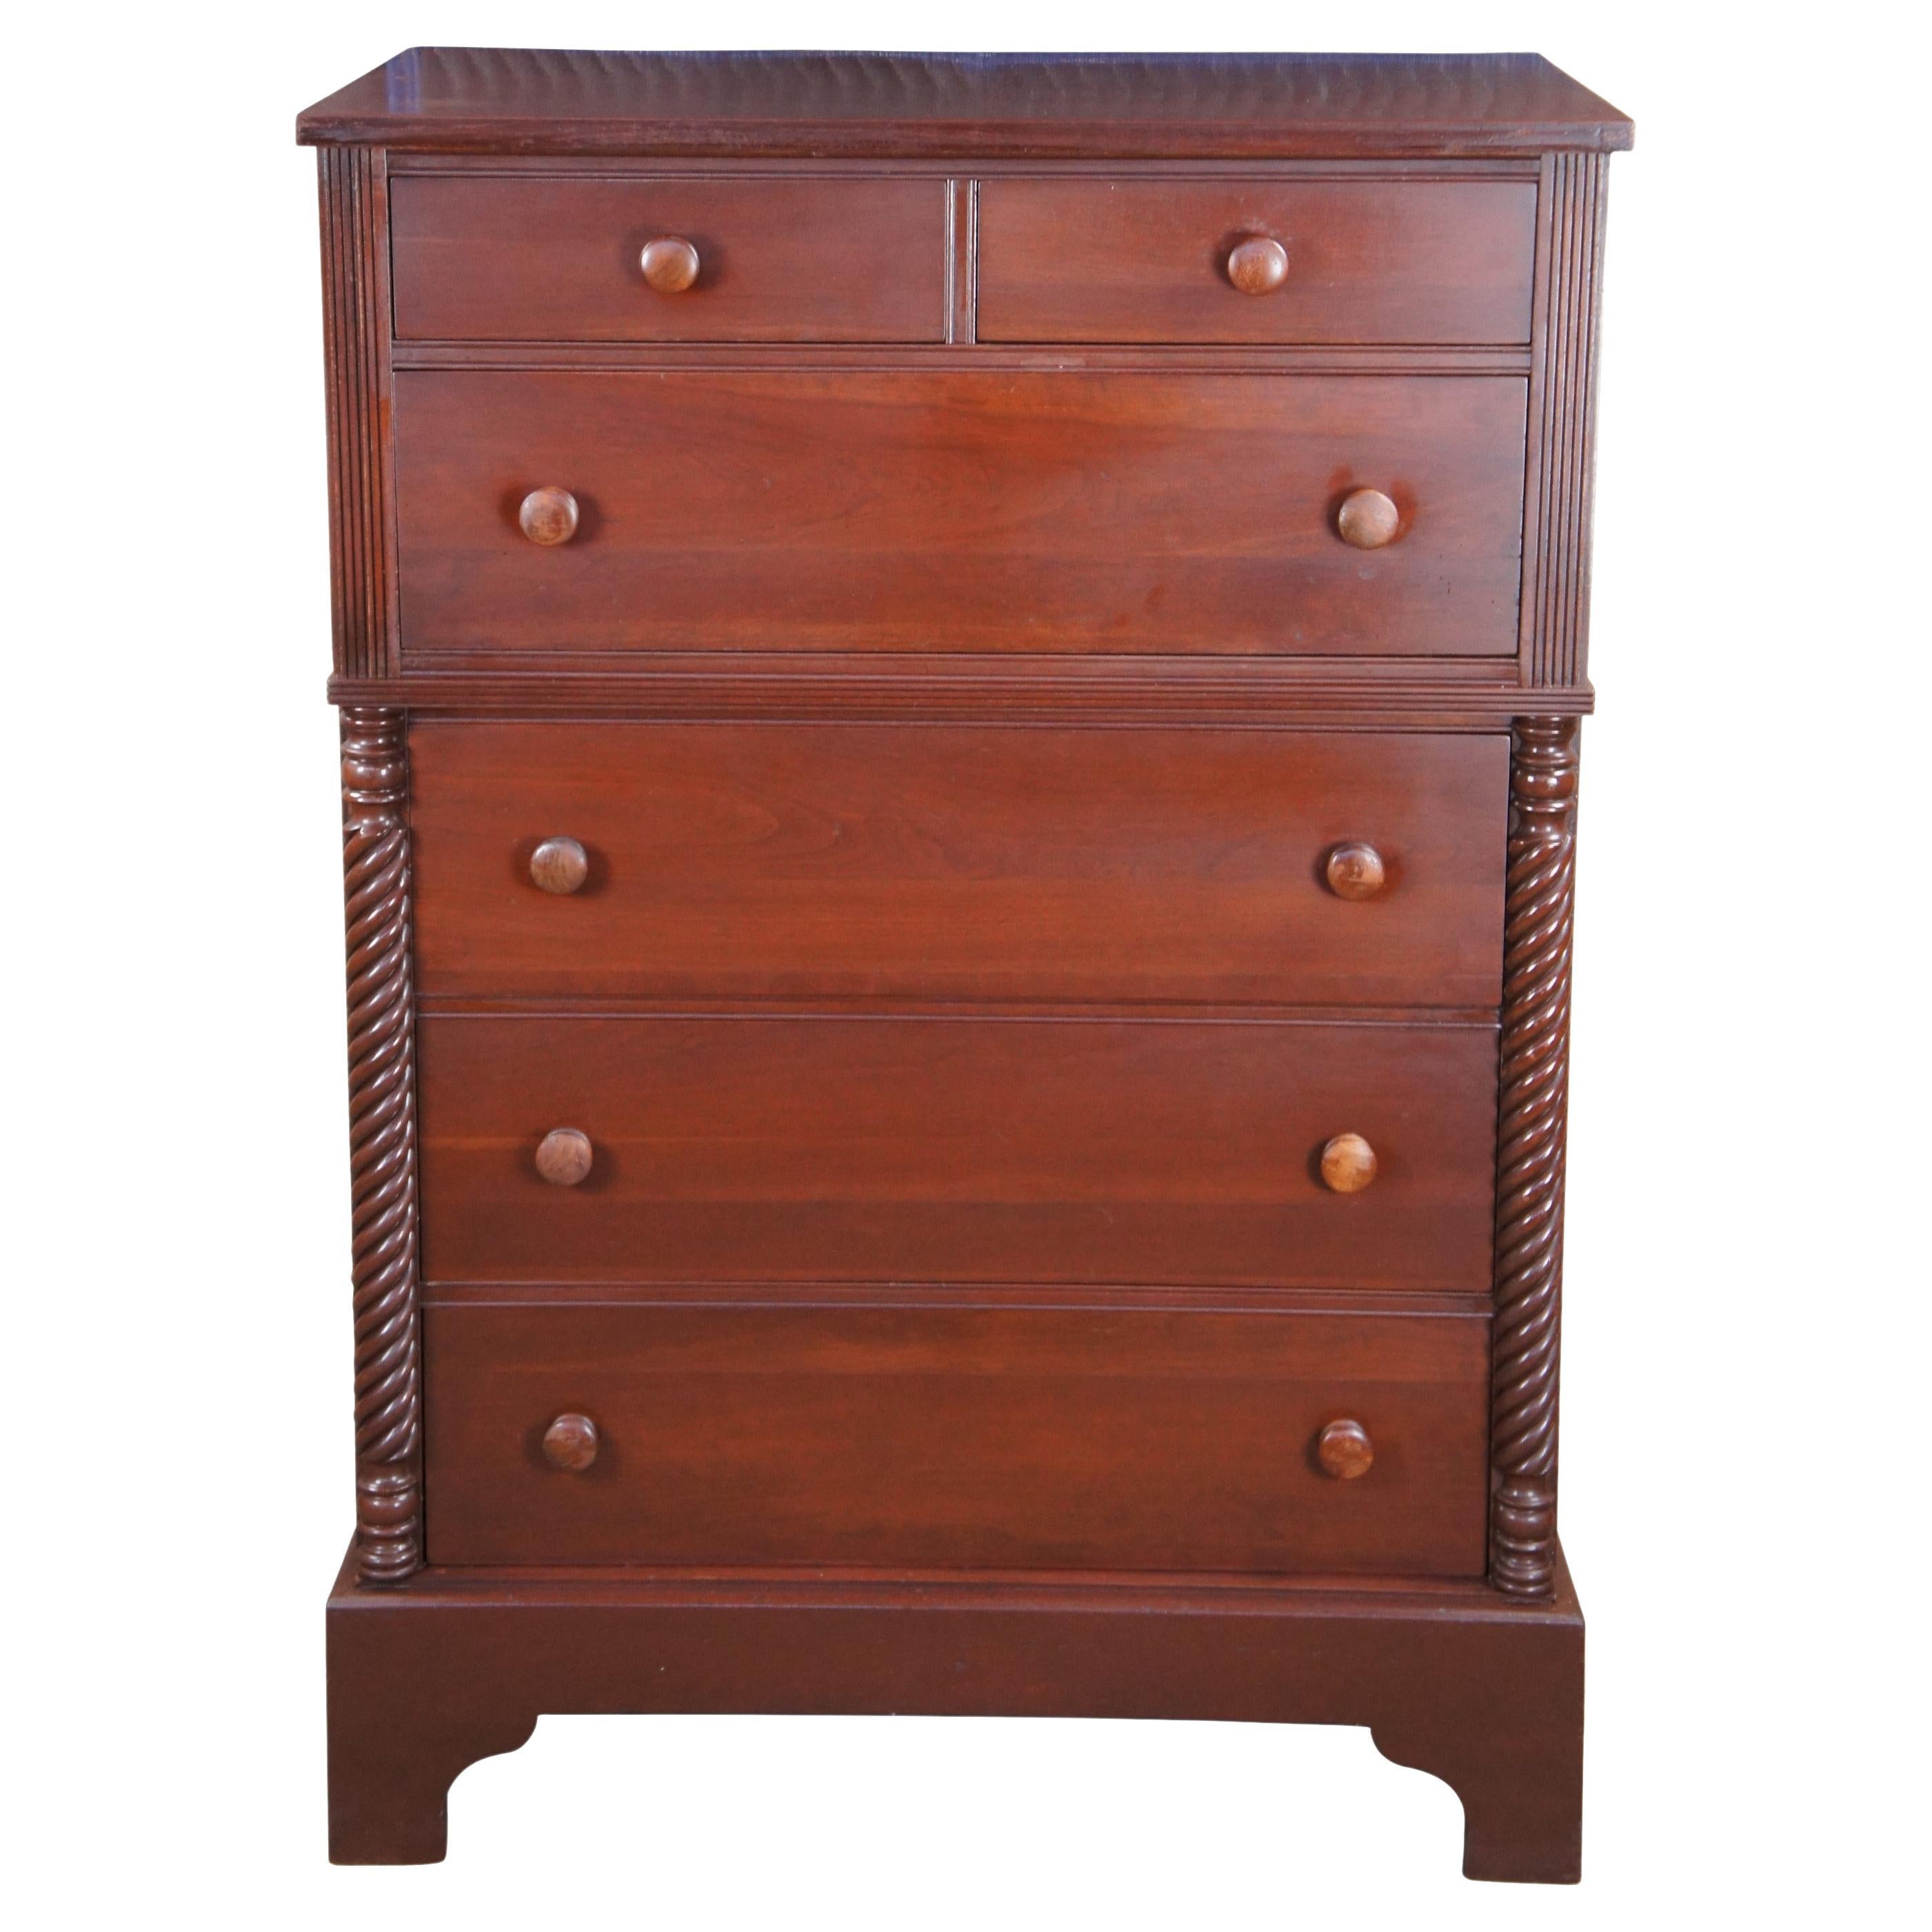 Antique Styled by Park American Federal Cherry Tallboy Chest of Drawers Dresser